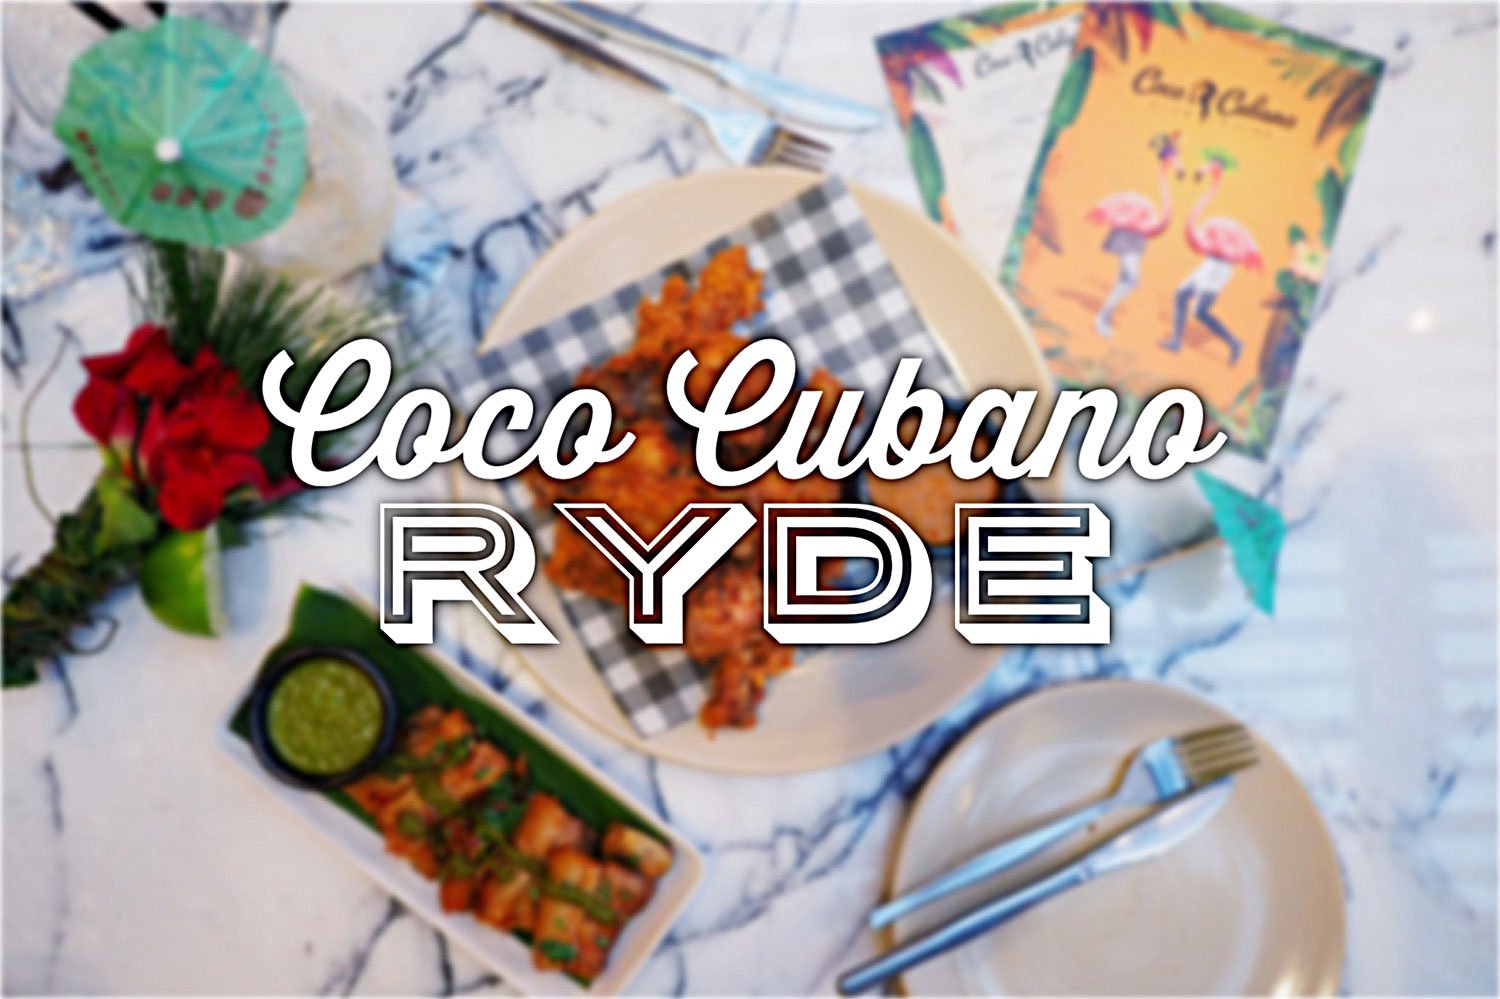 Sydney Food Blog Review of Coco Cubano, Ryde